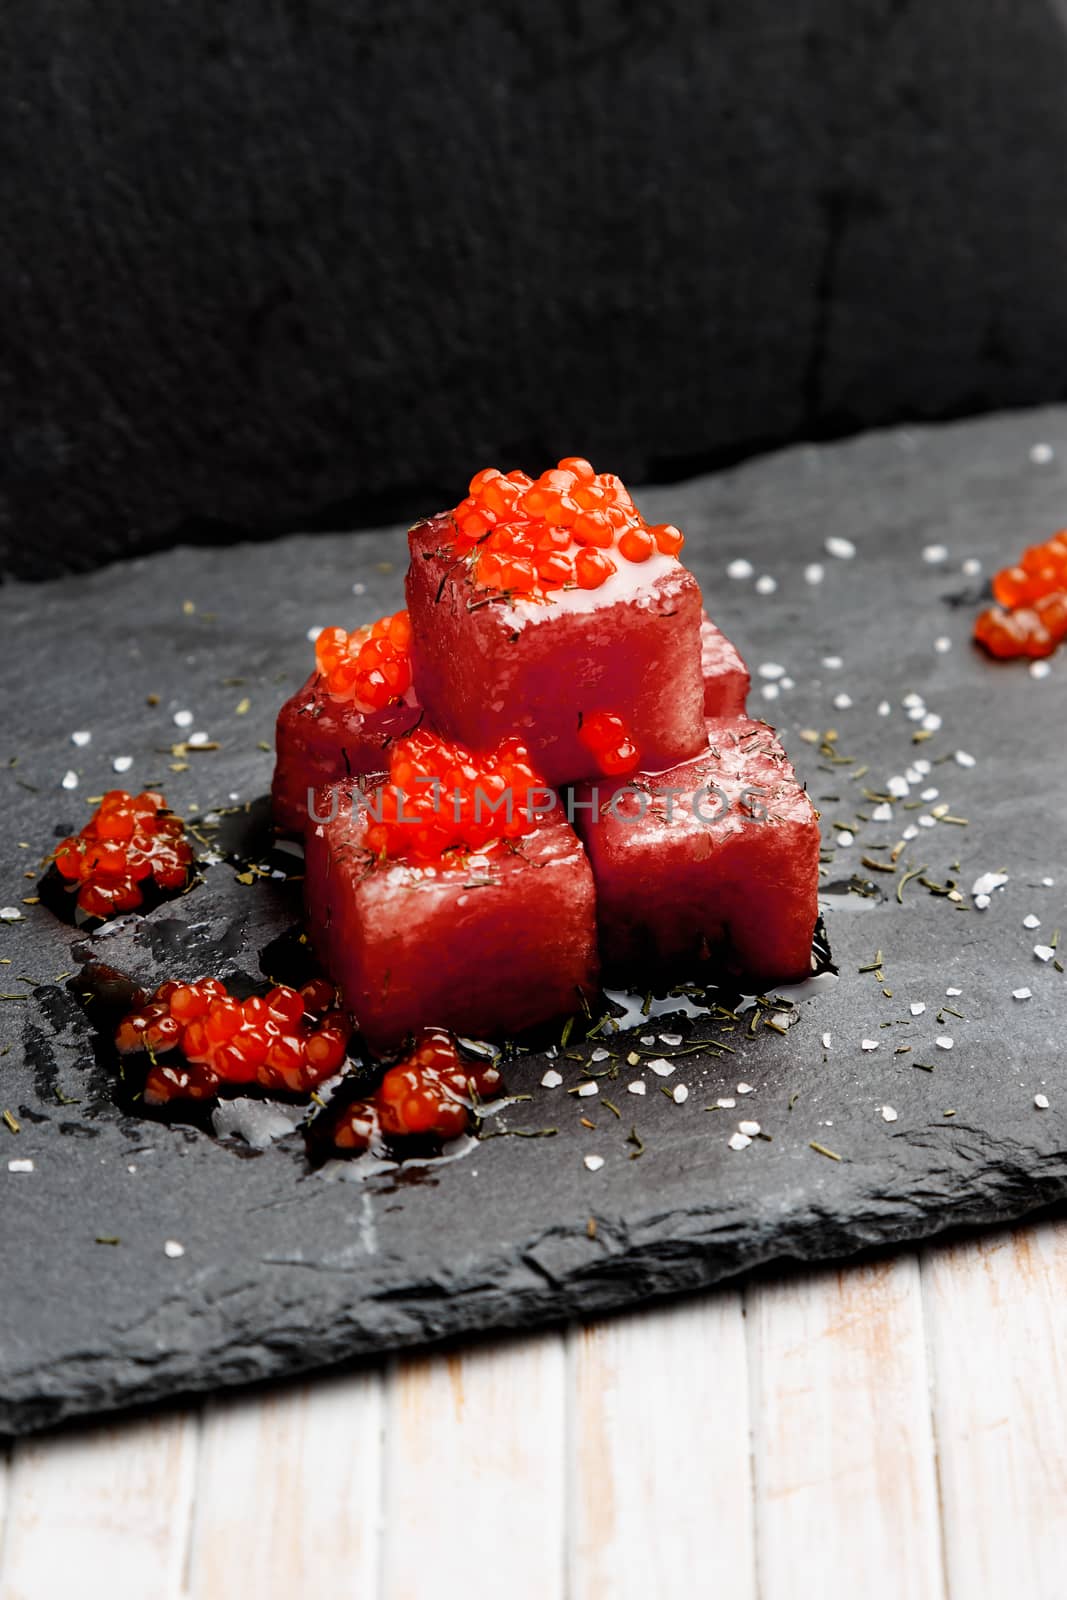 Tuna sashimi dipped in soy sauce with salmon roe, thick salt and dill on slate stone. Raw fish in traditional Japanese style. Vertical image.